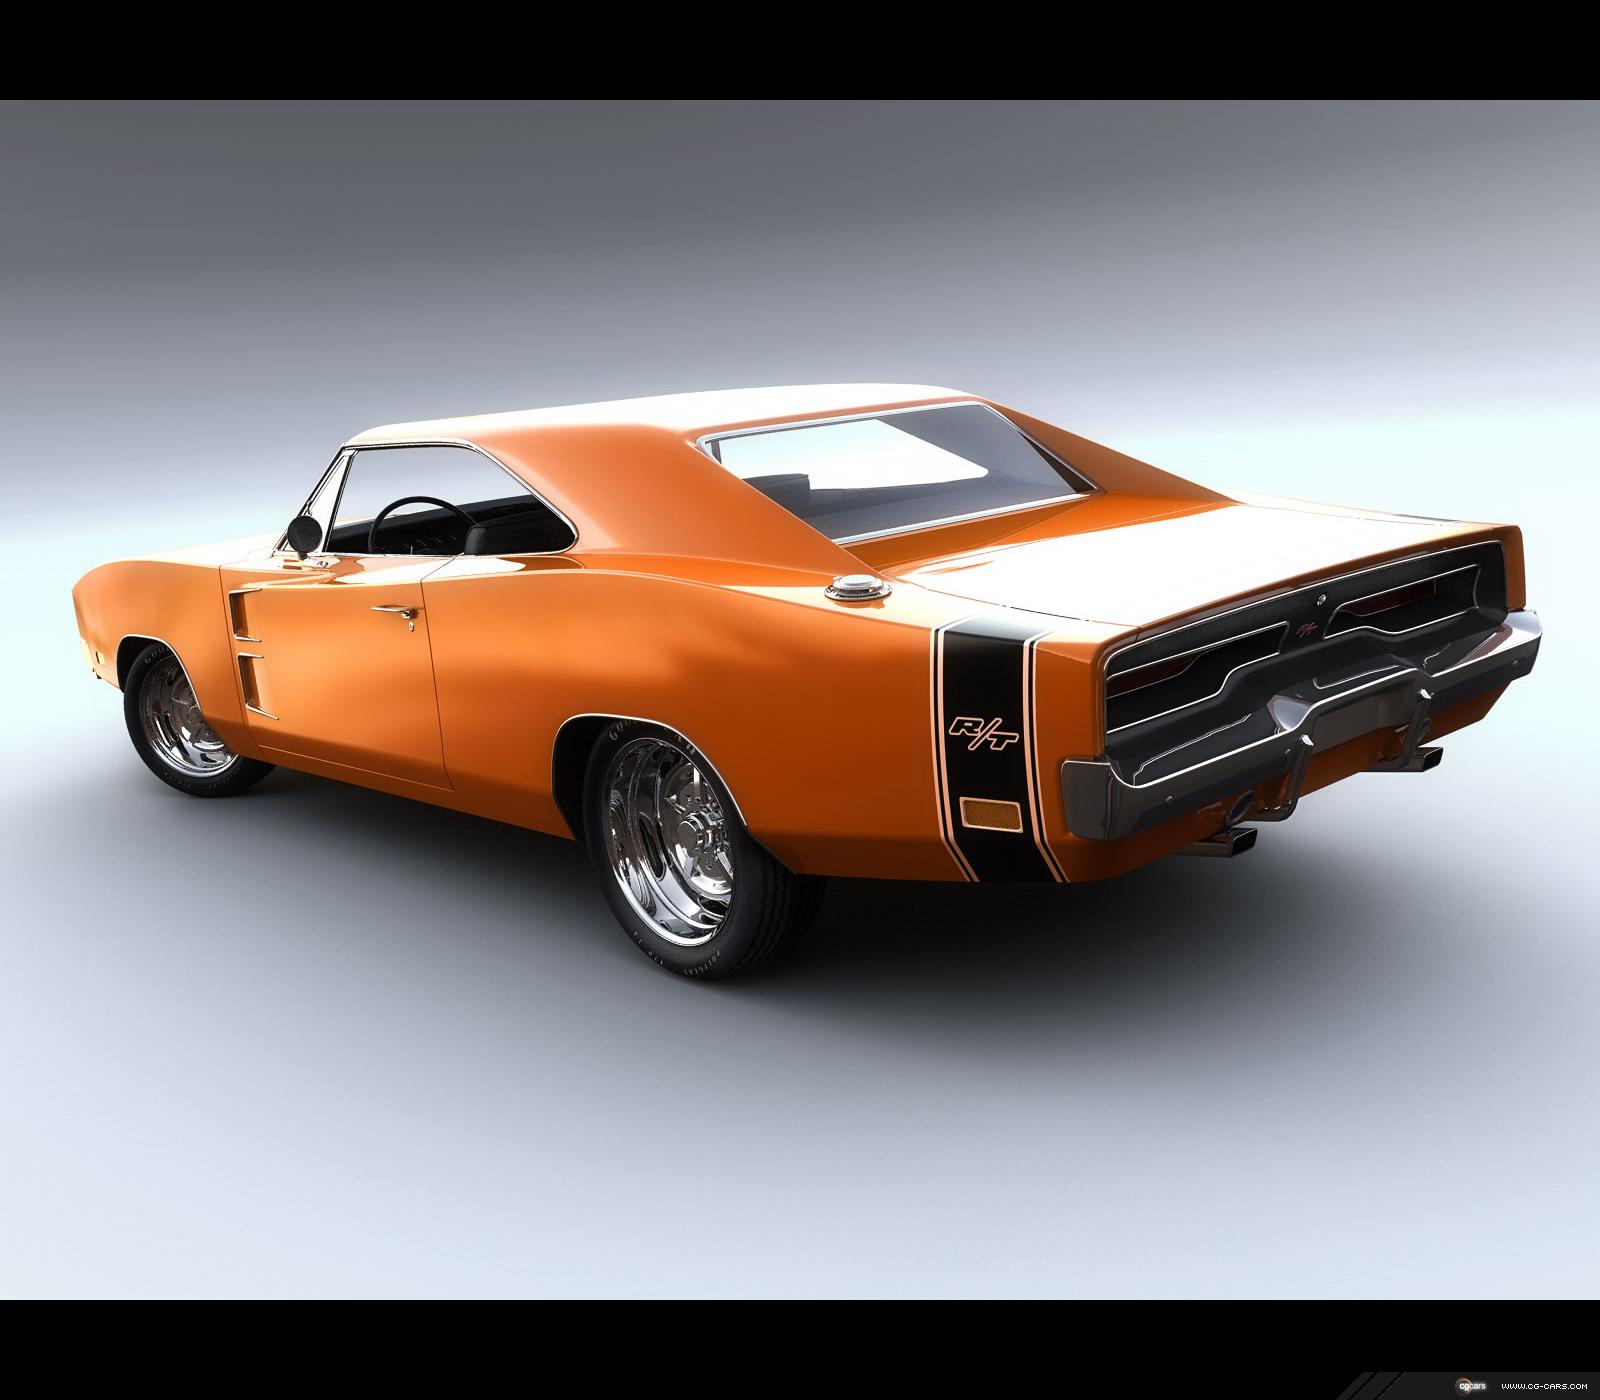 1969 Dodge Charger Rt Wallpaper Dodge Charger Rt Background